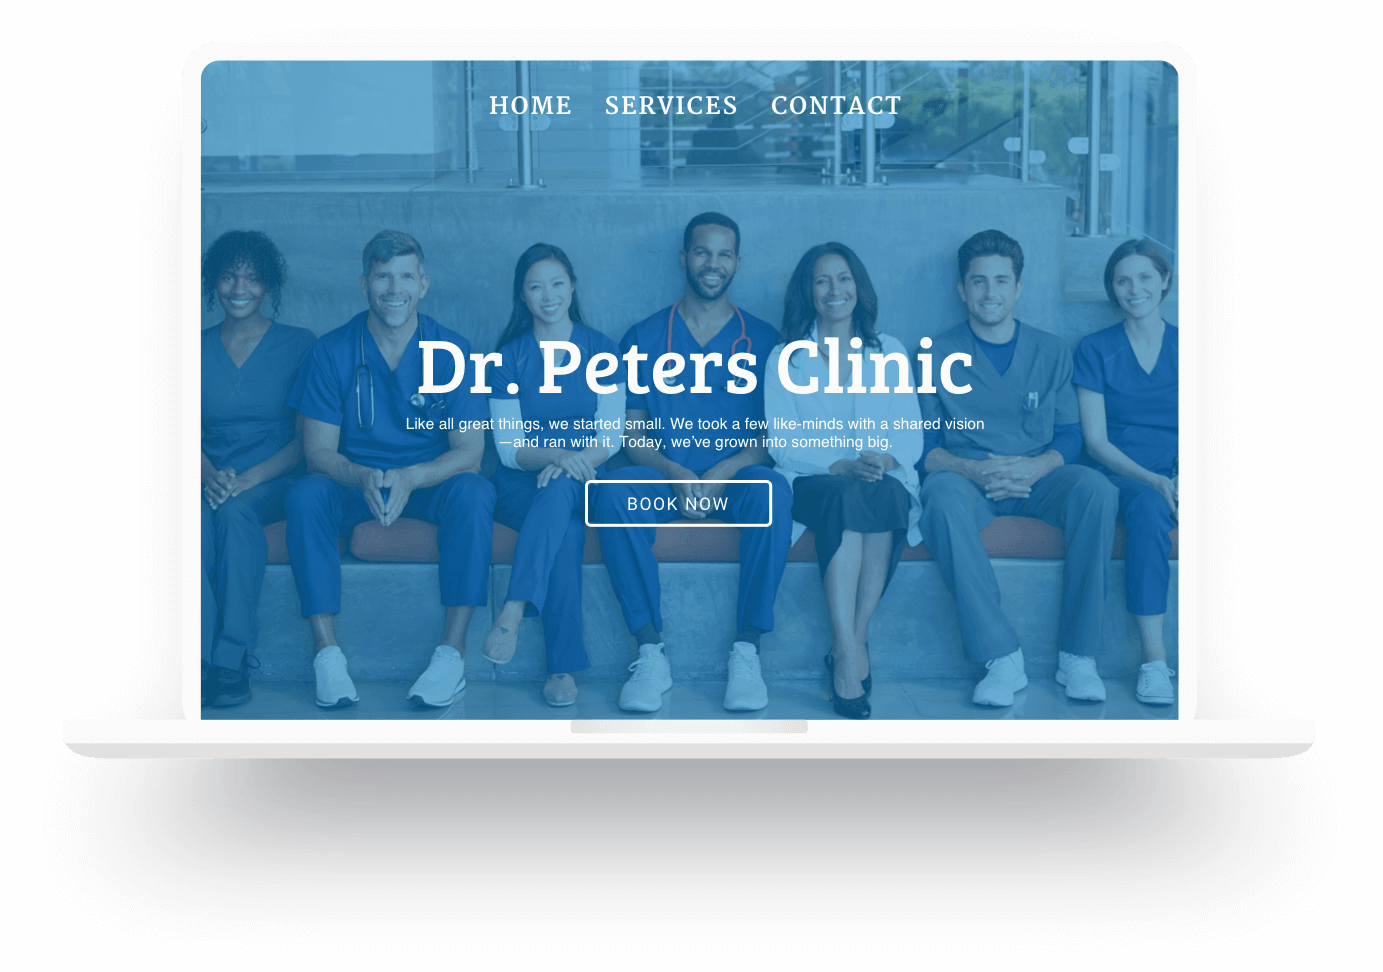 Example of a medical clinic website built with Jimdo